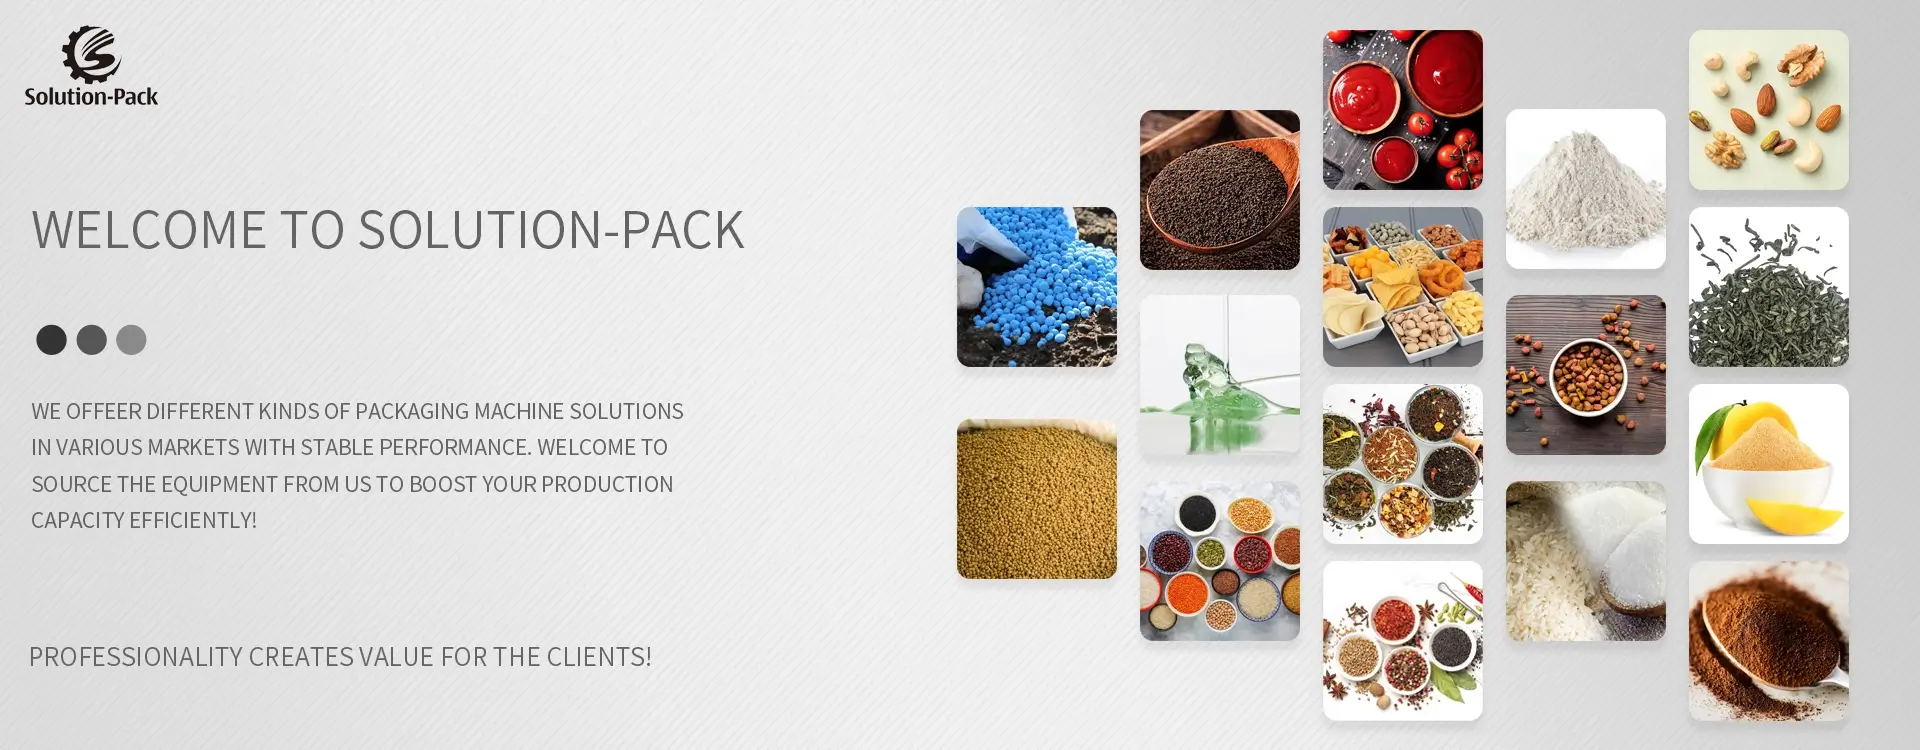 (Solution-Pack) Various Applications Intelligent Packaging Machine Solutions Heading Banner Picture